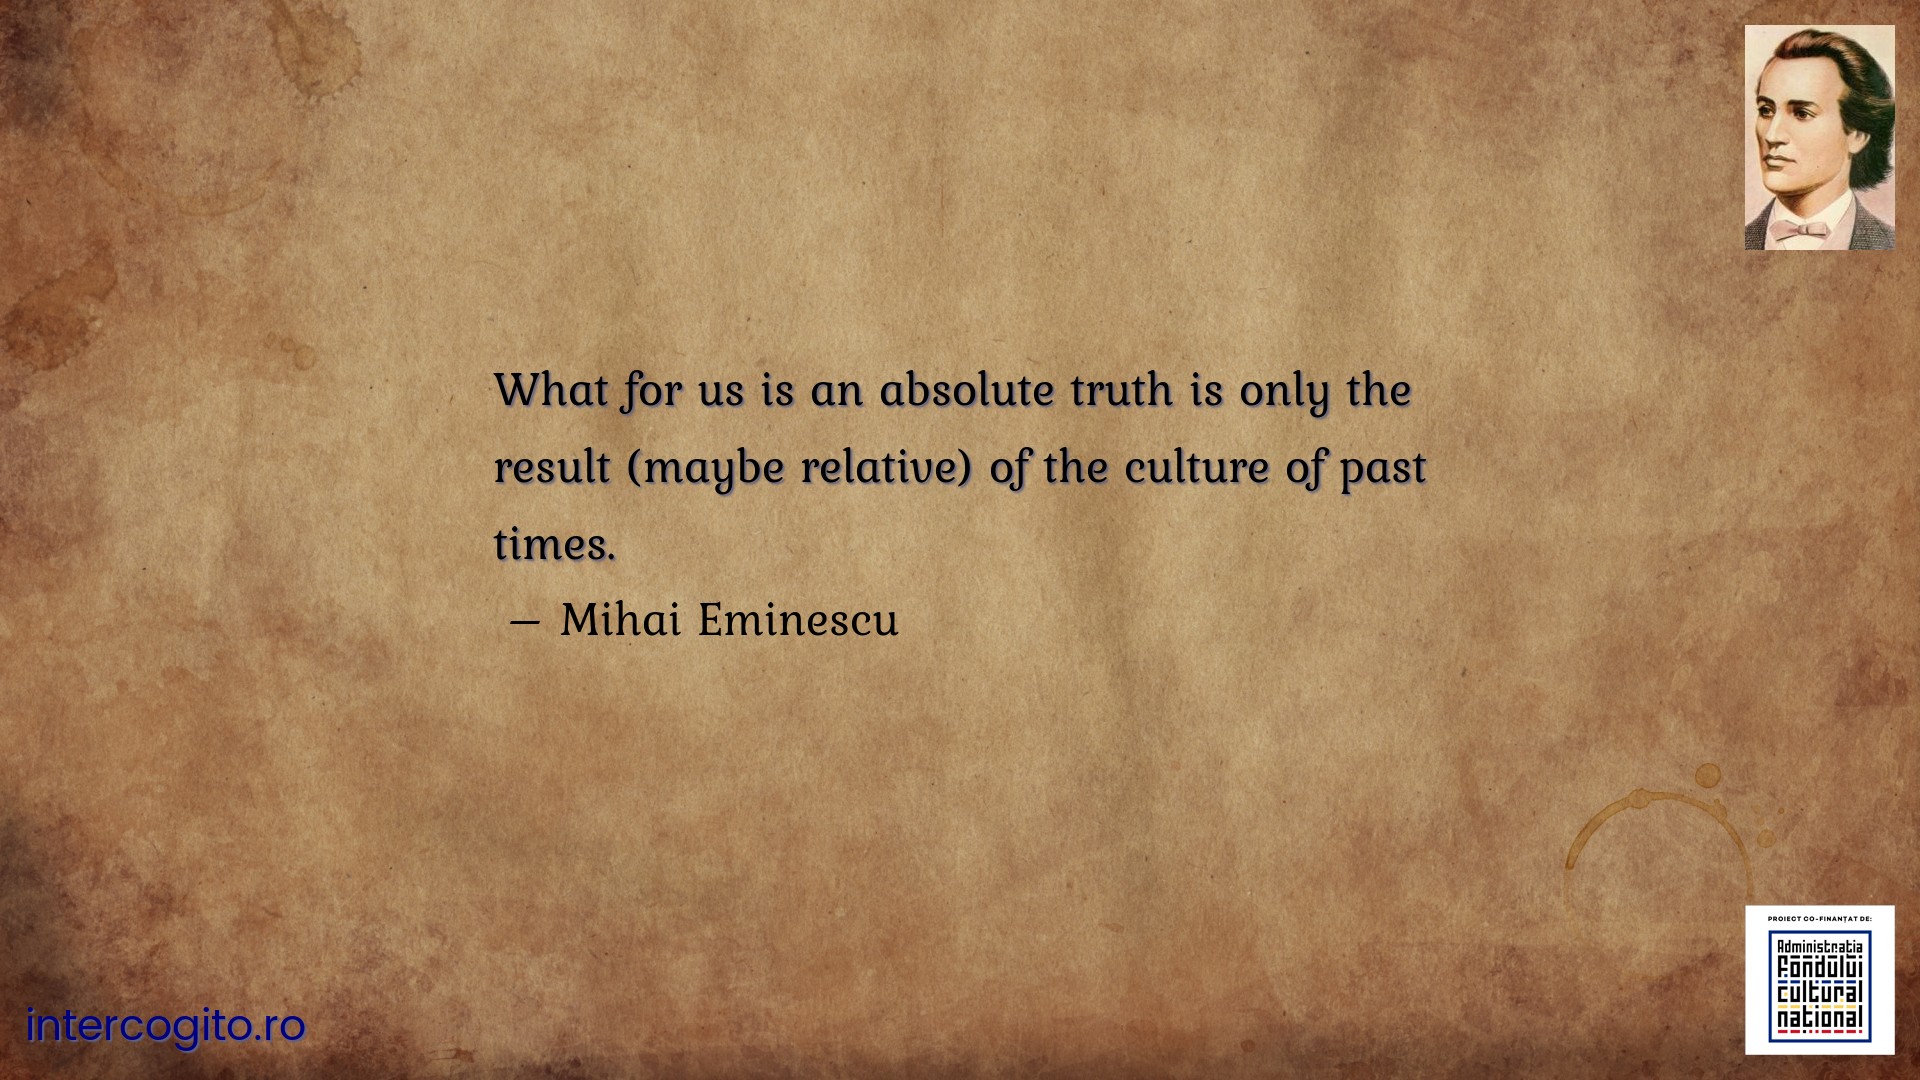 What for us is an absolute truth is only the result (maybe relative) of the culture of past times.